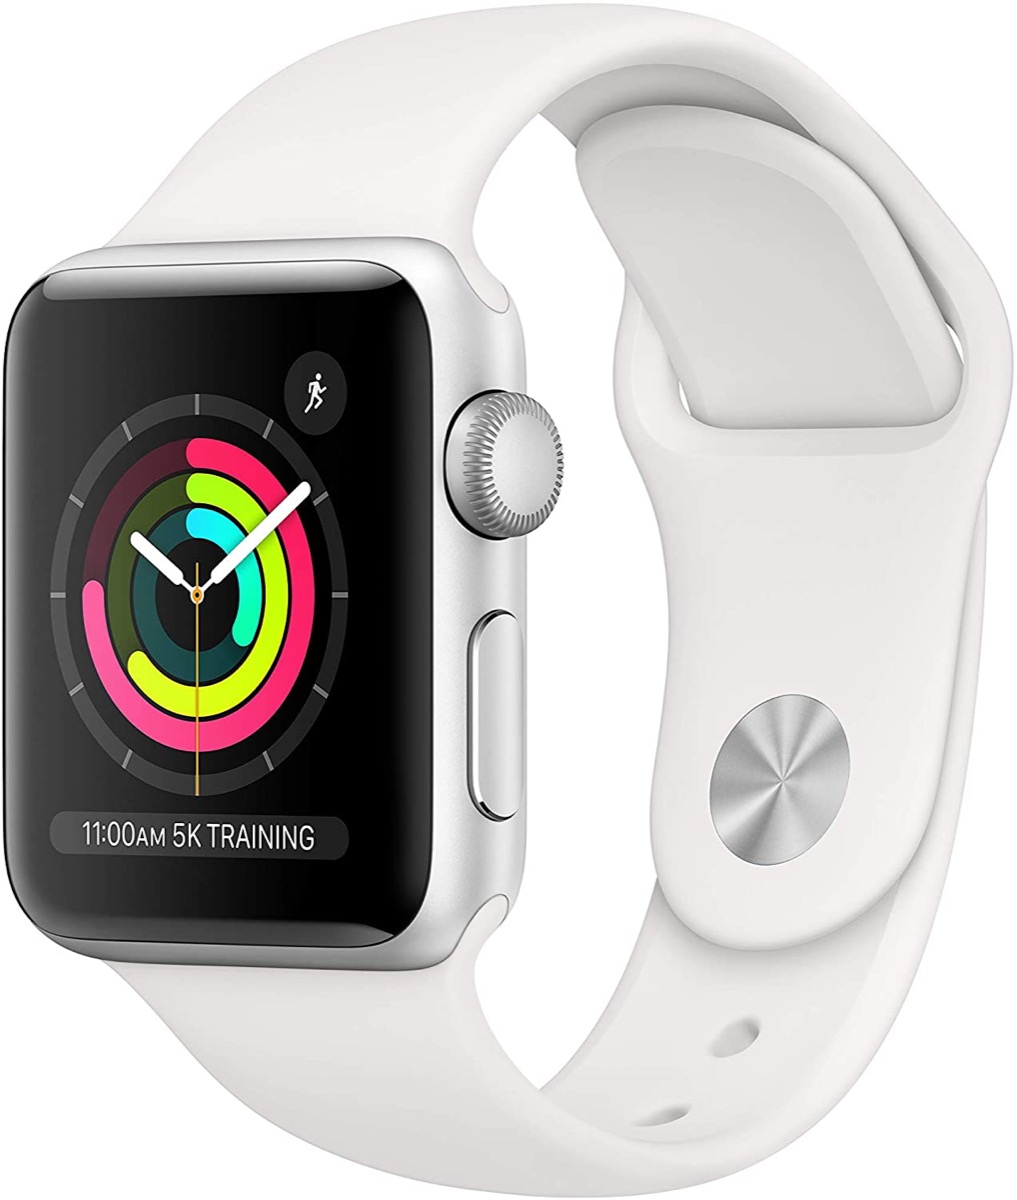 white and silver apple watch